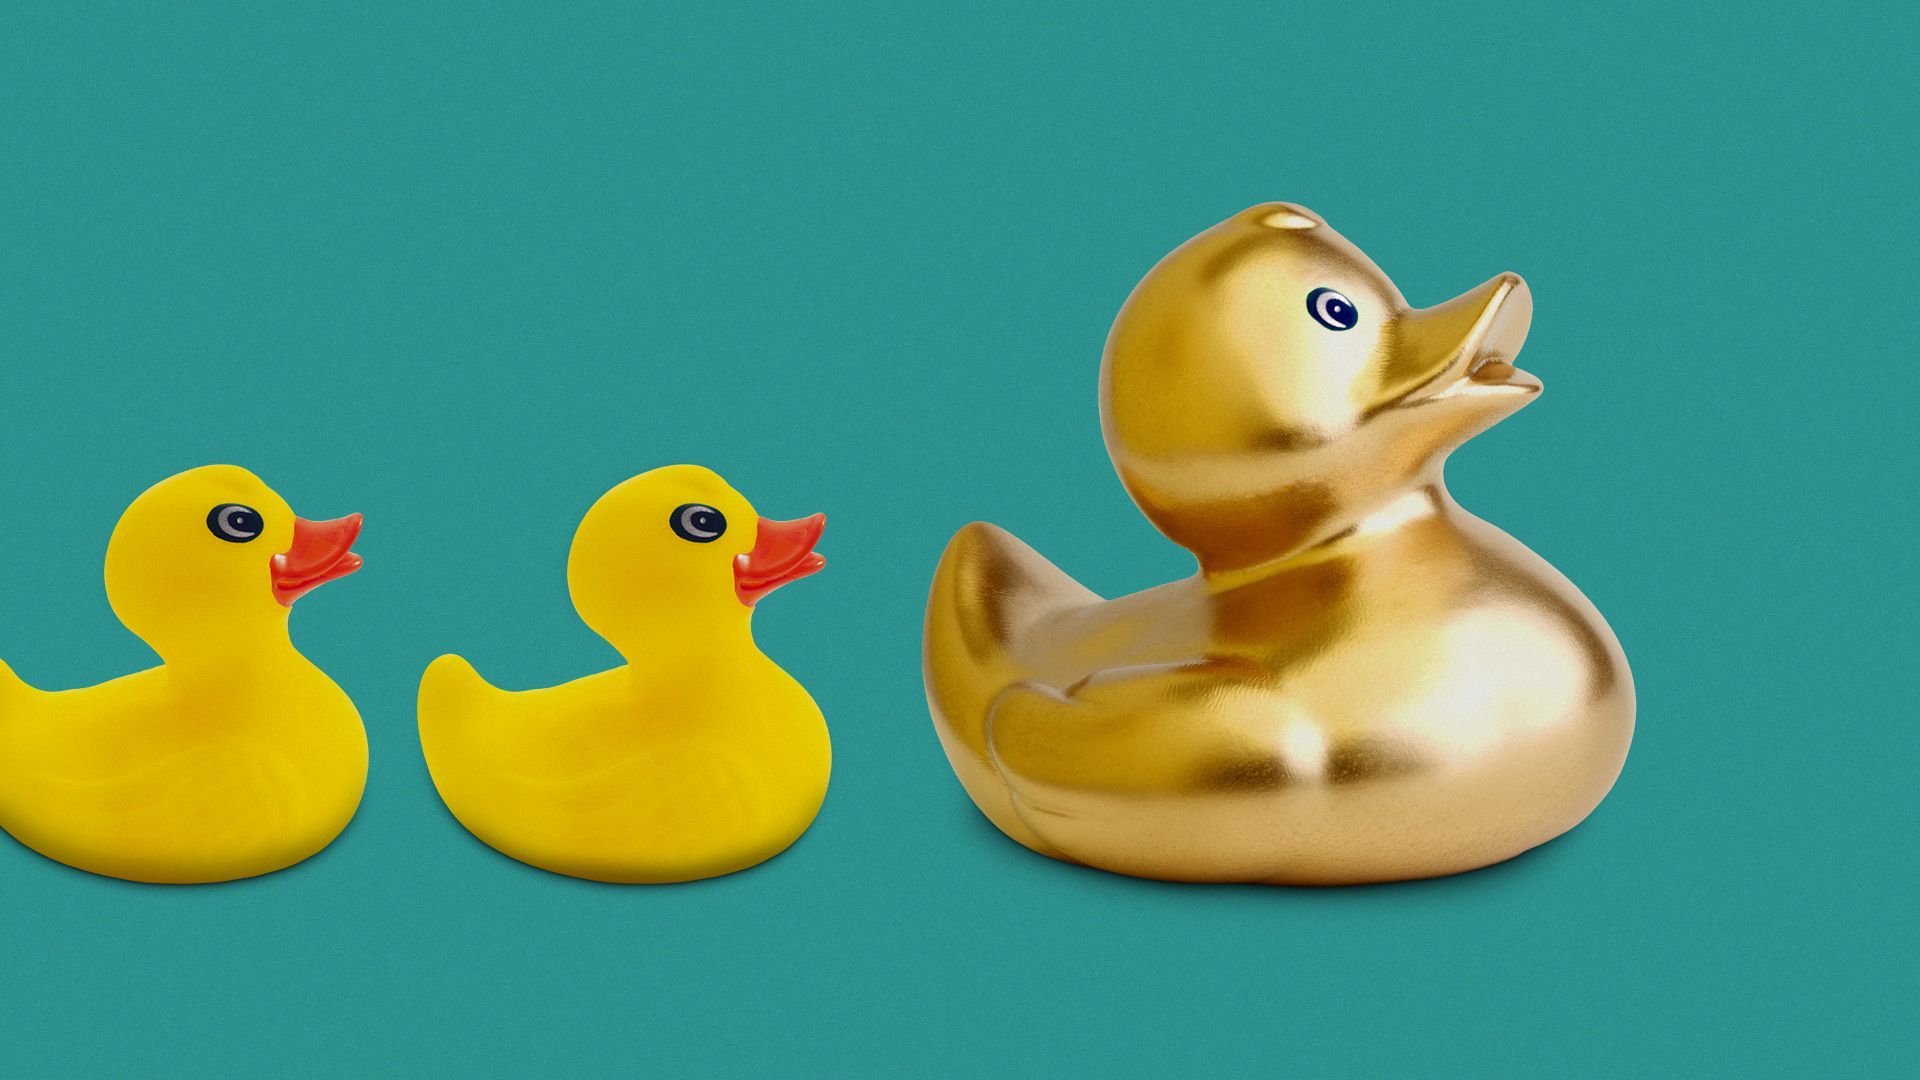 Illustration of one large golden rubber ducky, and two smaller yellow rubber duckies following behind it.